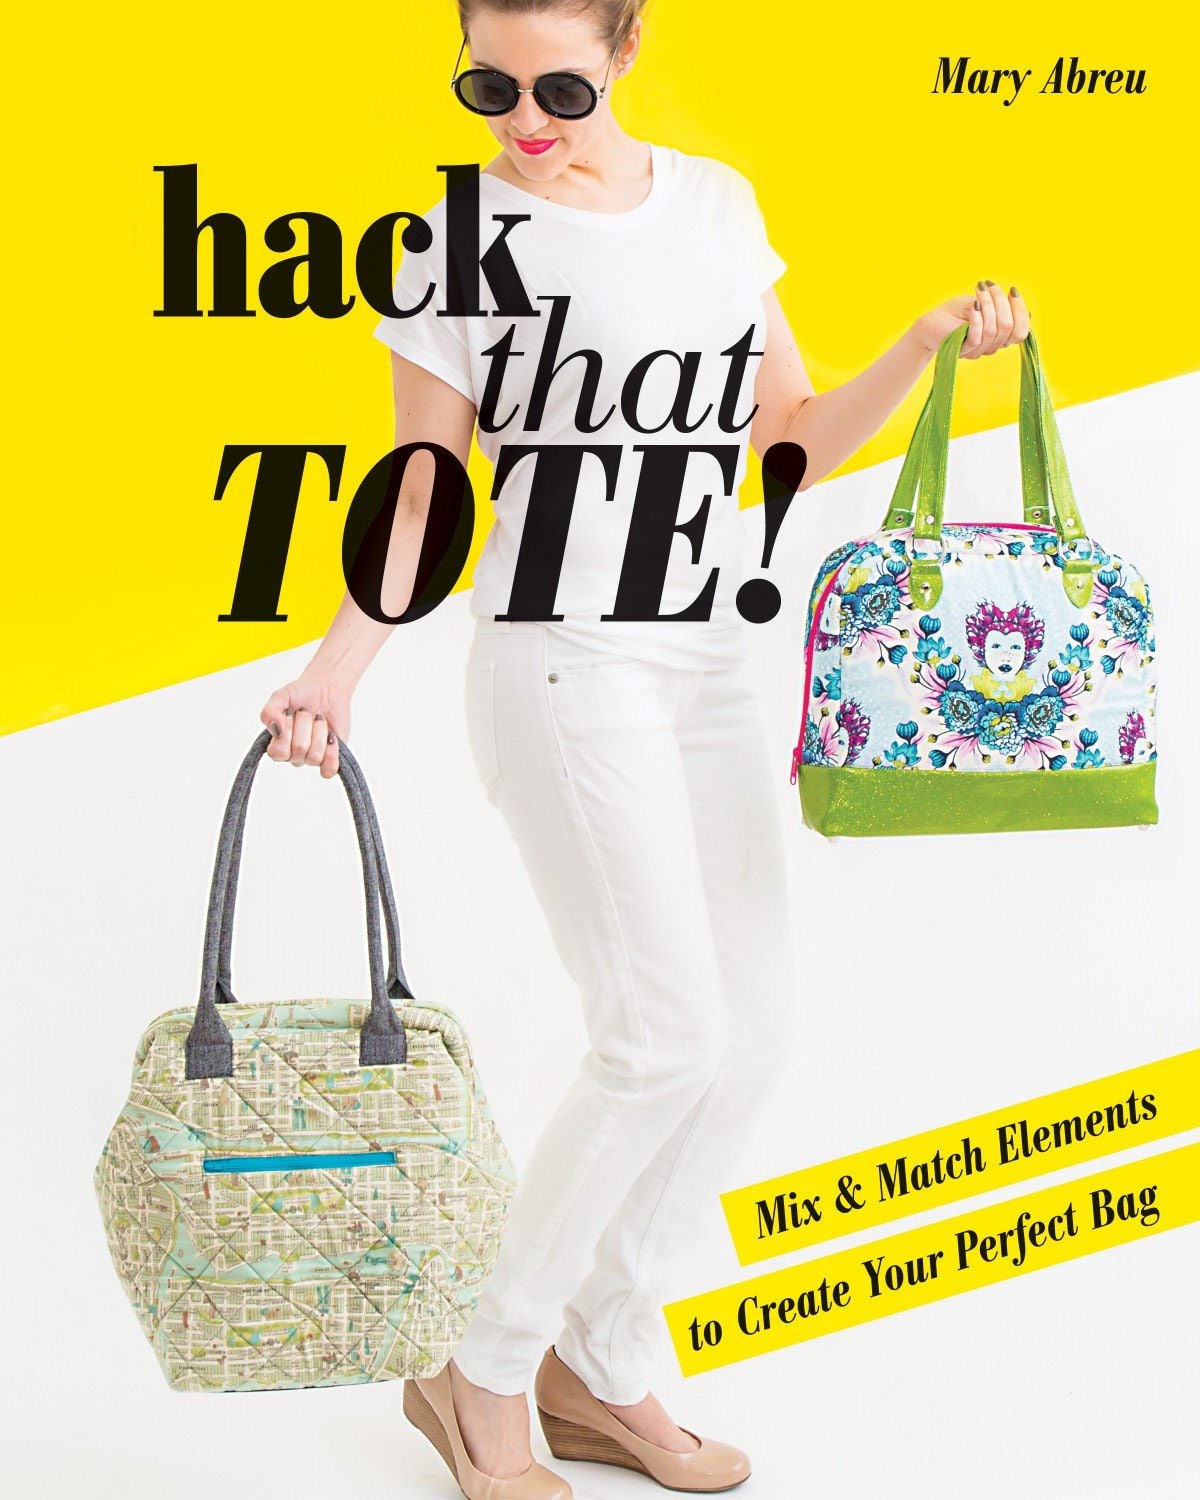 Hack That Tote!: Mix & Match Elements To Create Your Perfect Bag